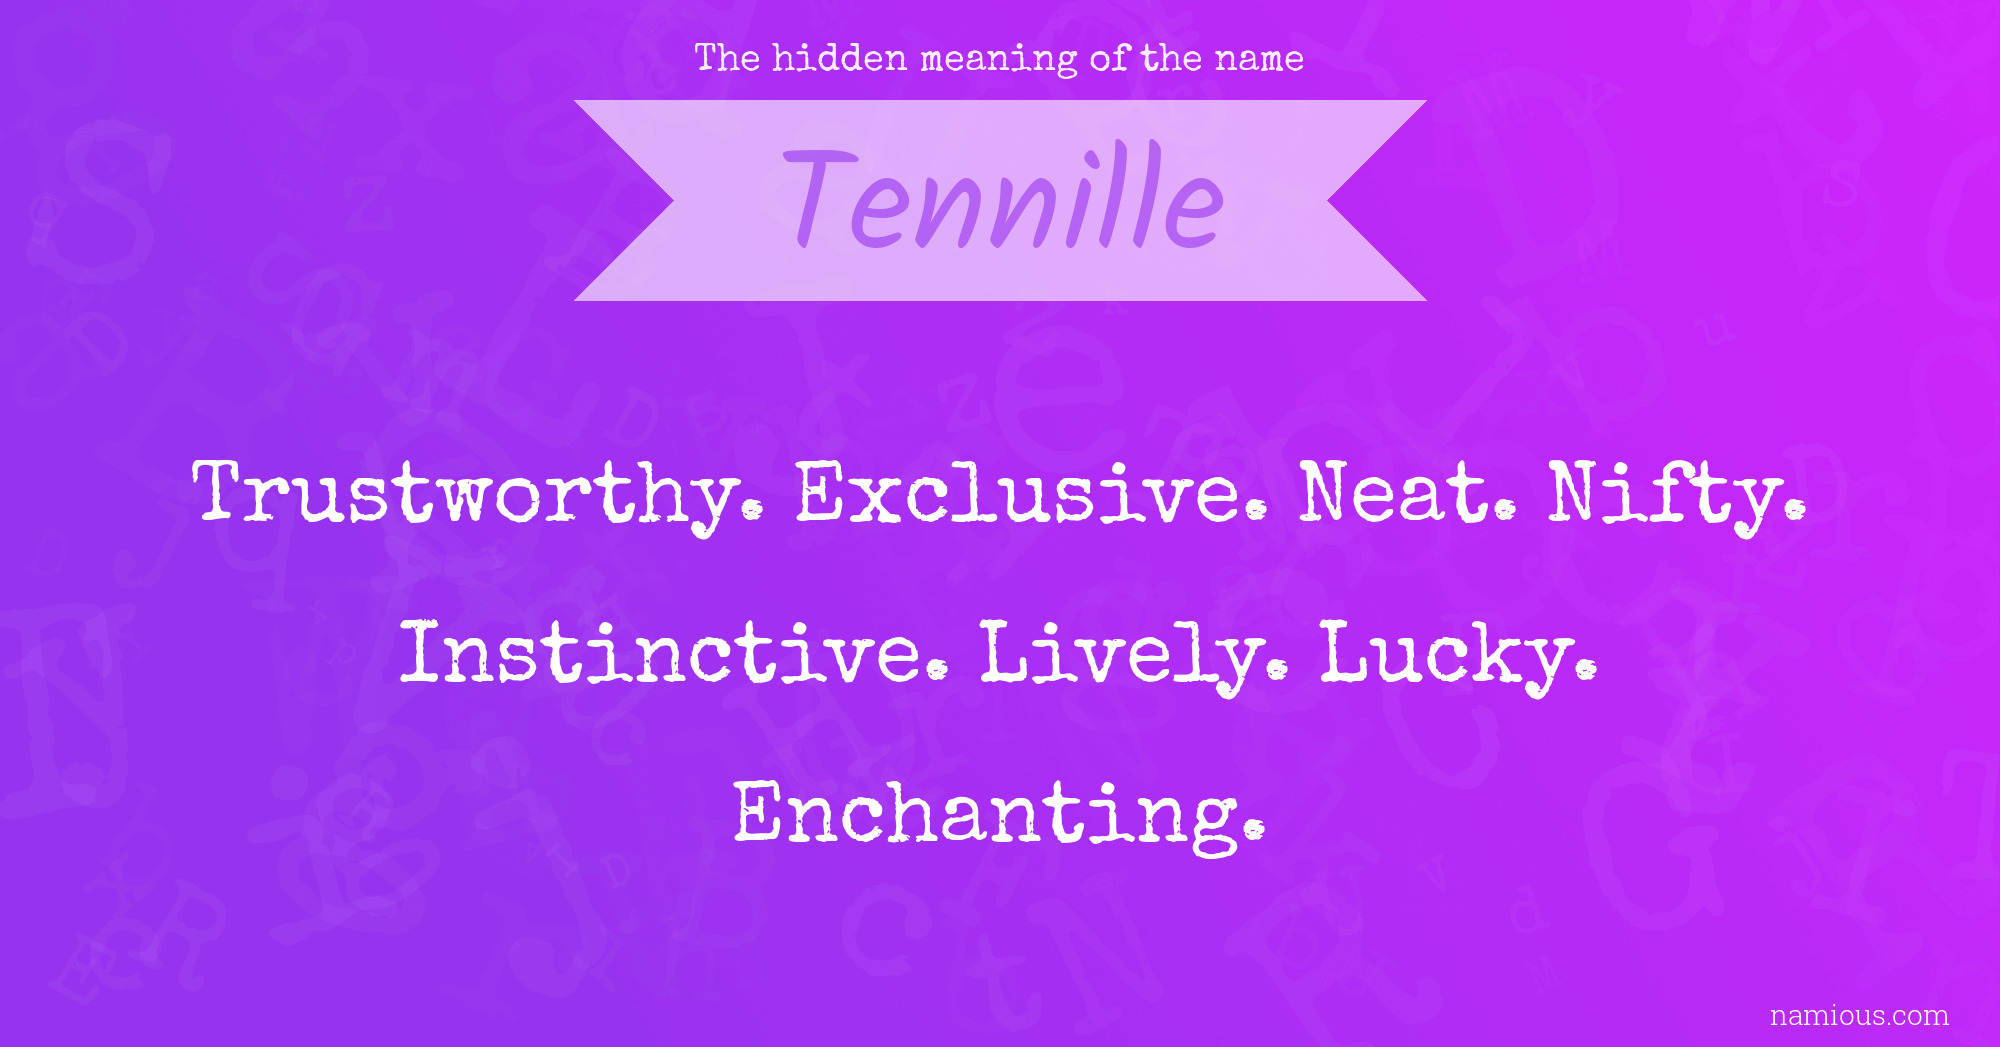 The hidden meaning of the name Tennille